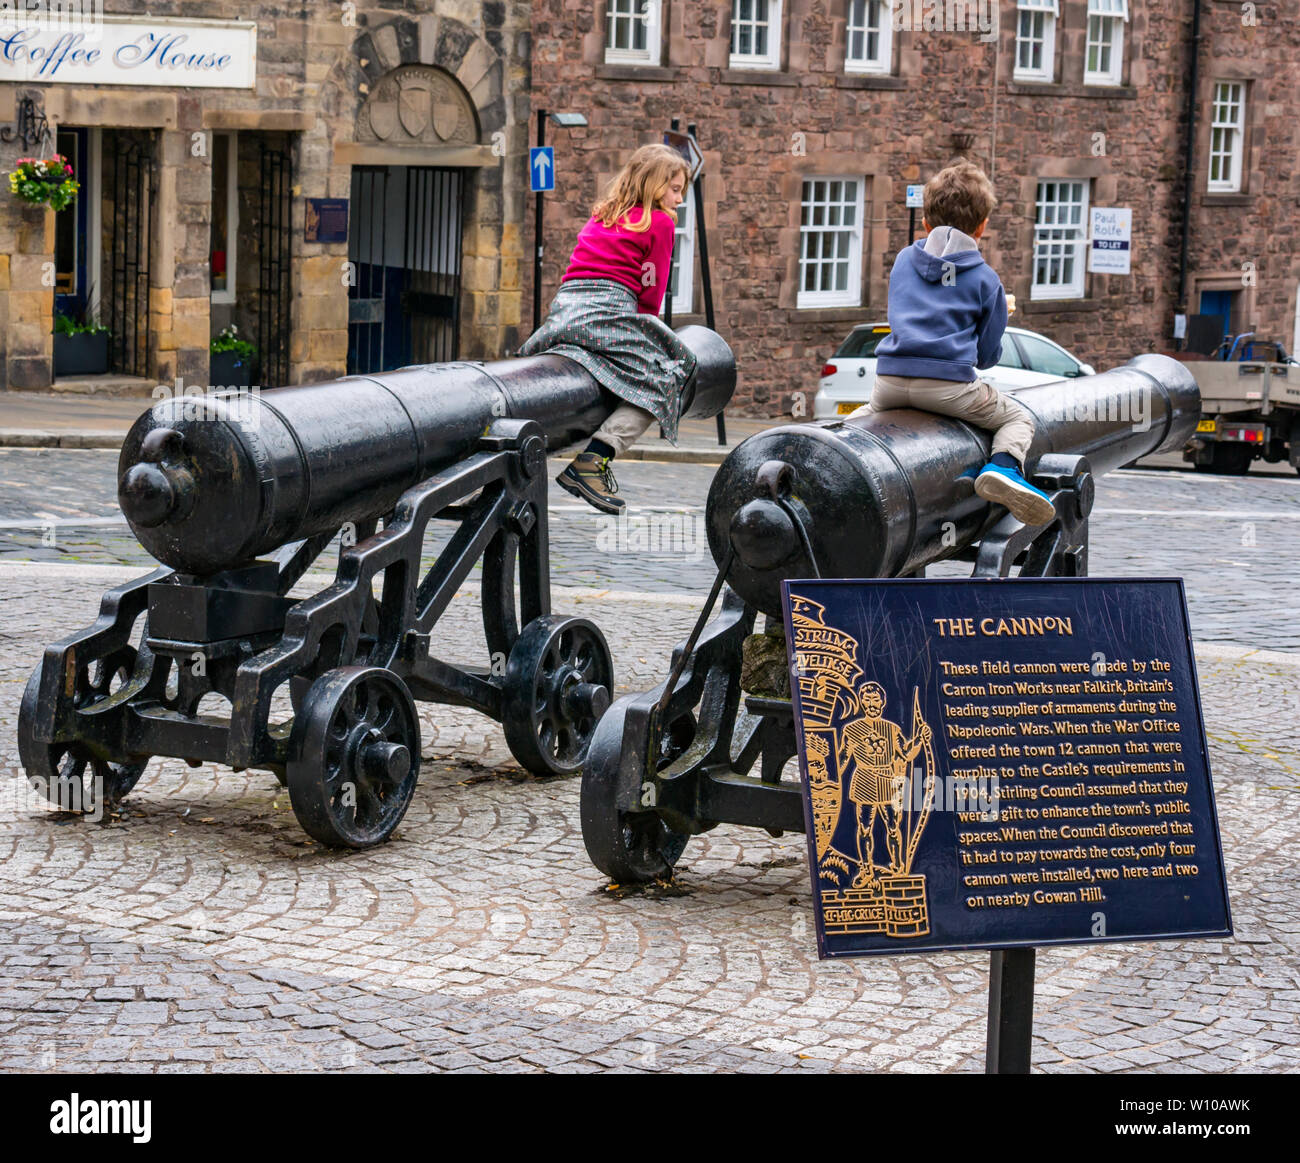 Children sitting on historic old cannons, Broad Street, Stirling Old Town, Scotland UK Stock Photo